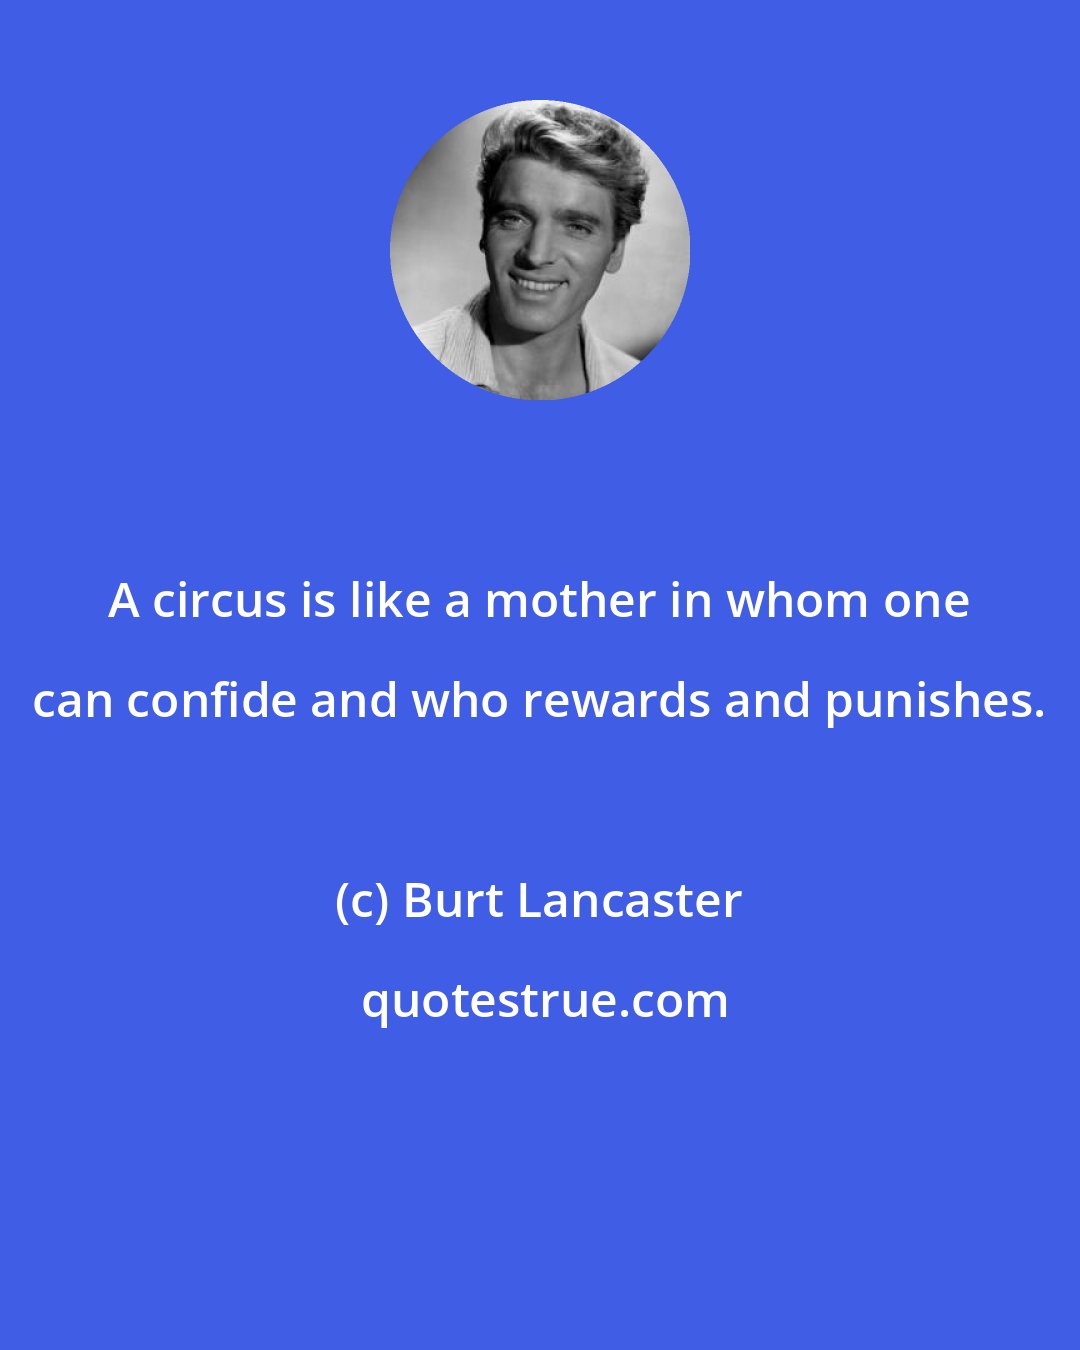 Burt Lancaster: A circus is like a mother in whom one can confide and who rewards and punishes.